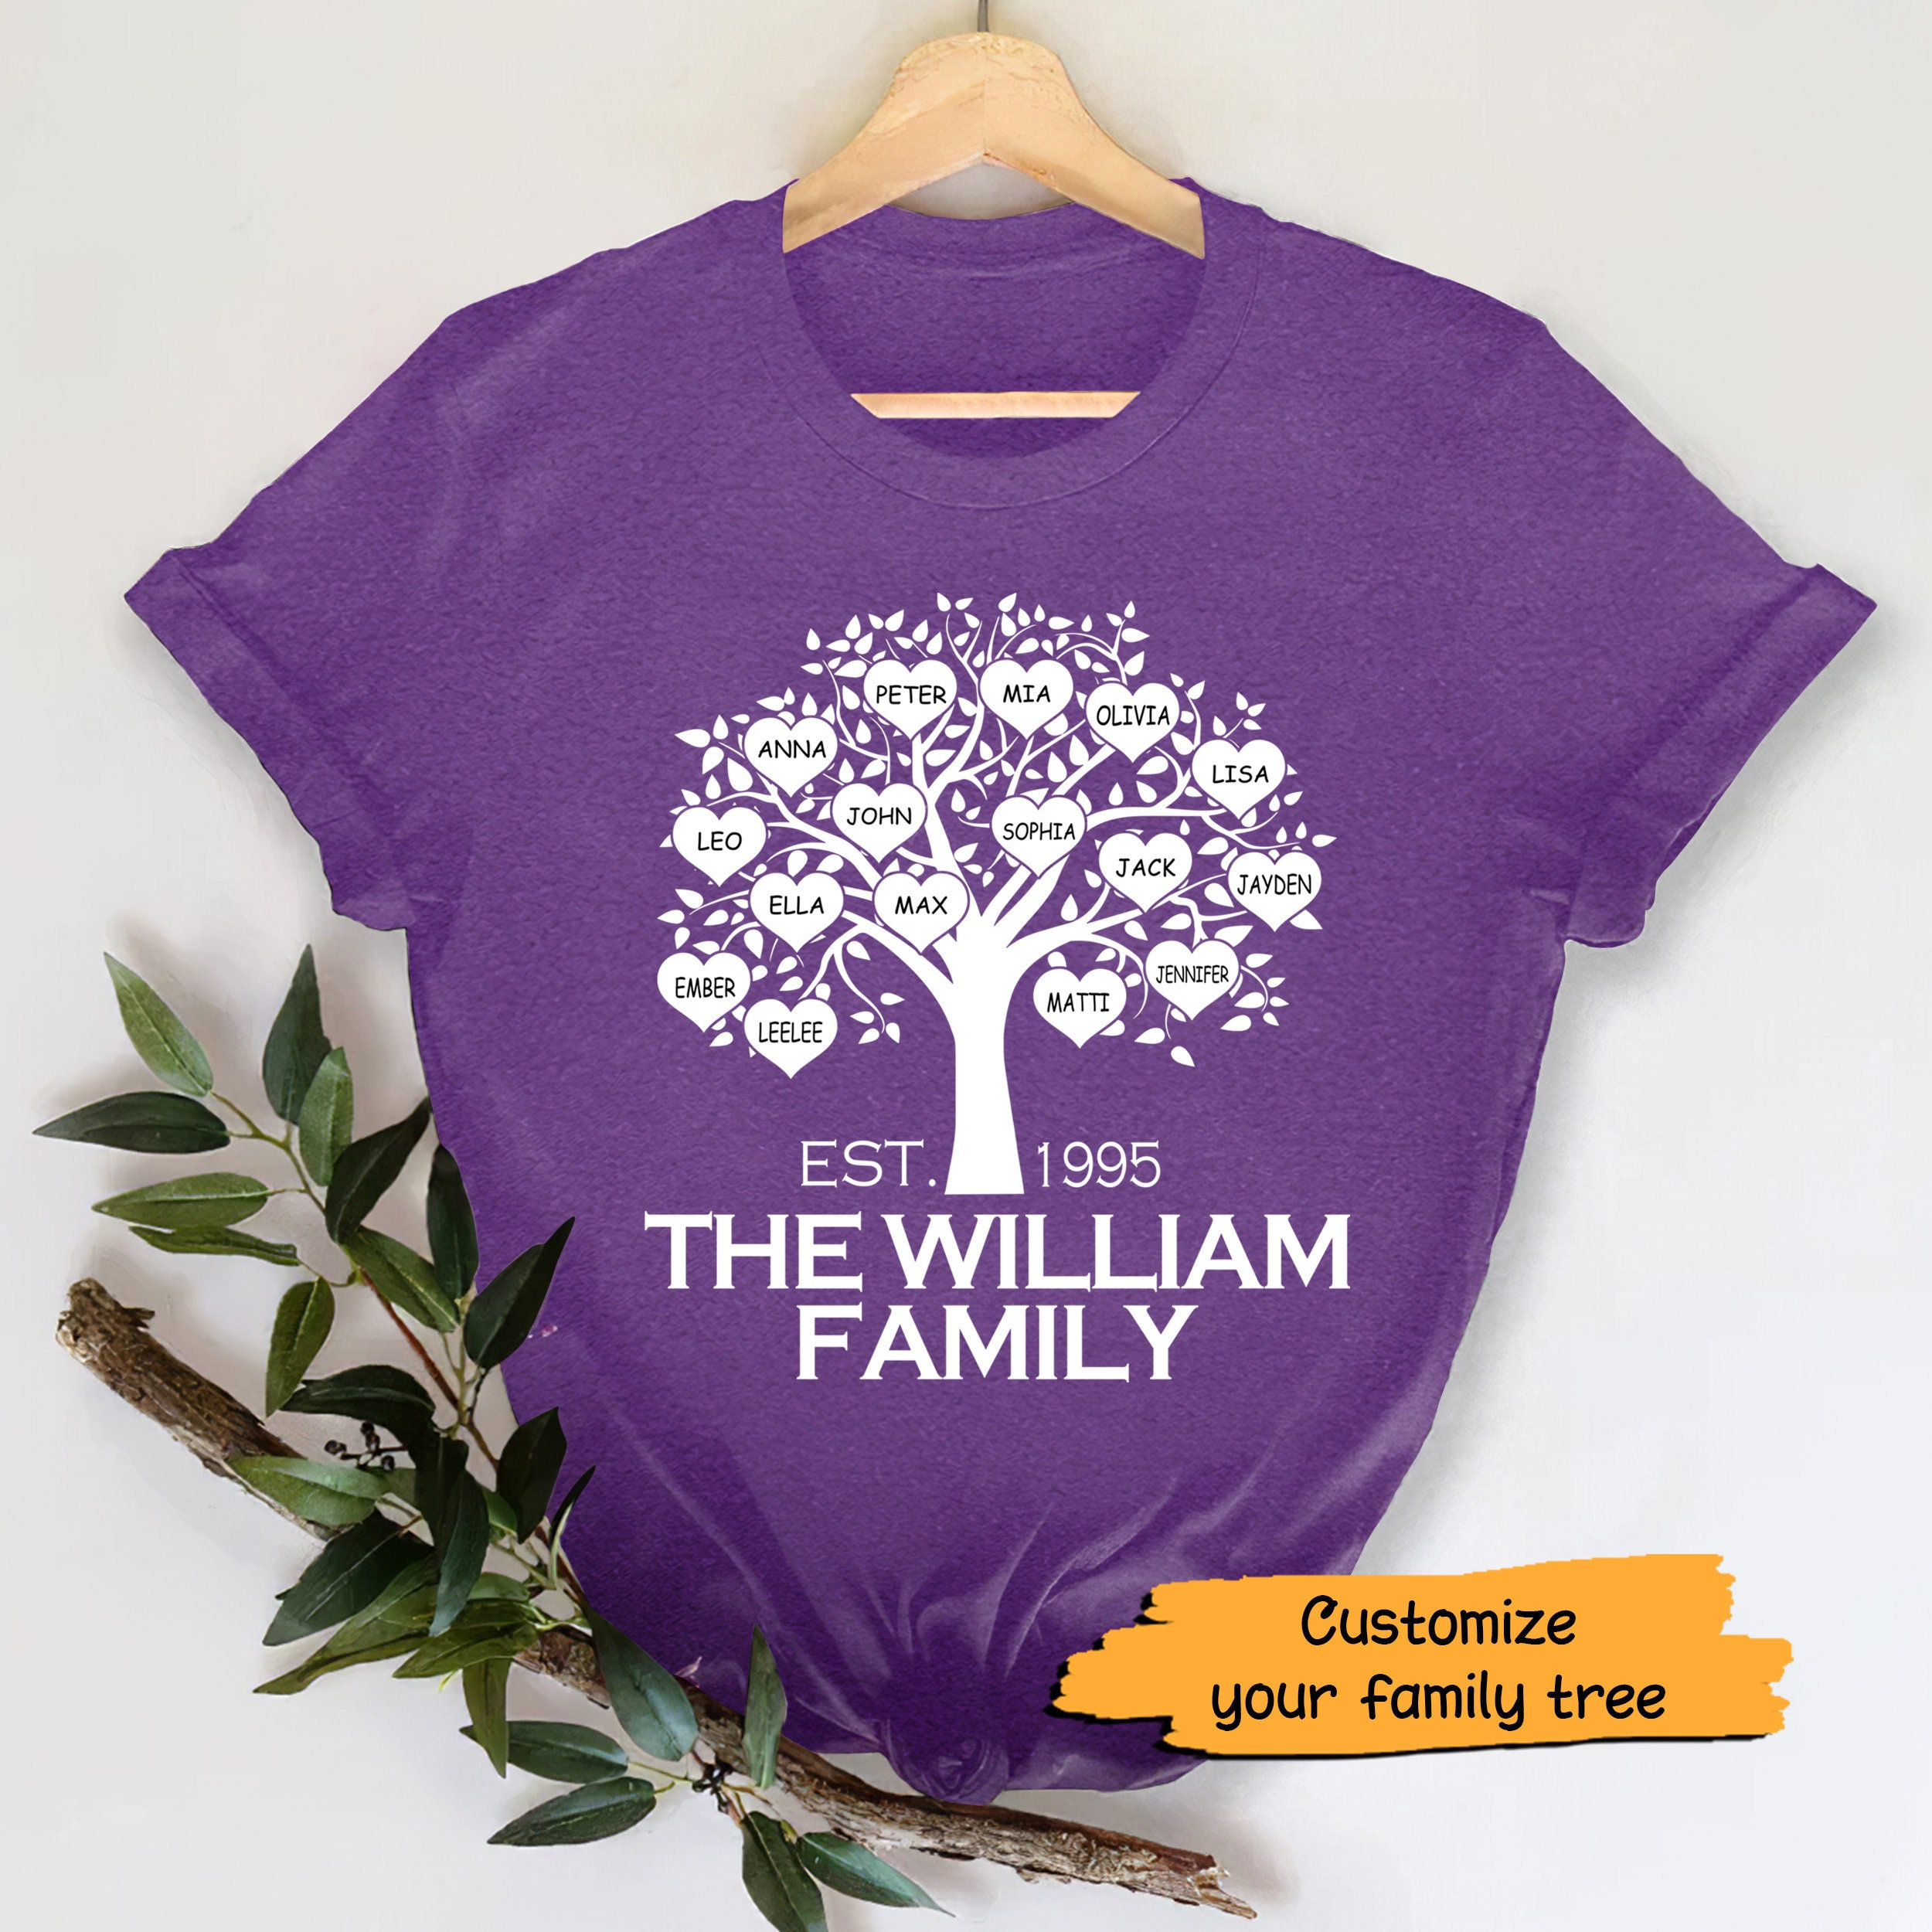 Family Tree Designs For T Shirts